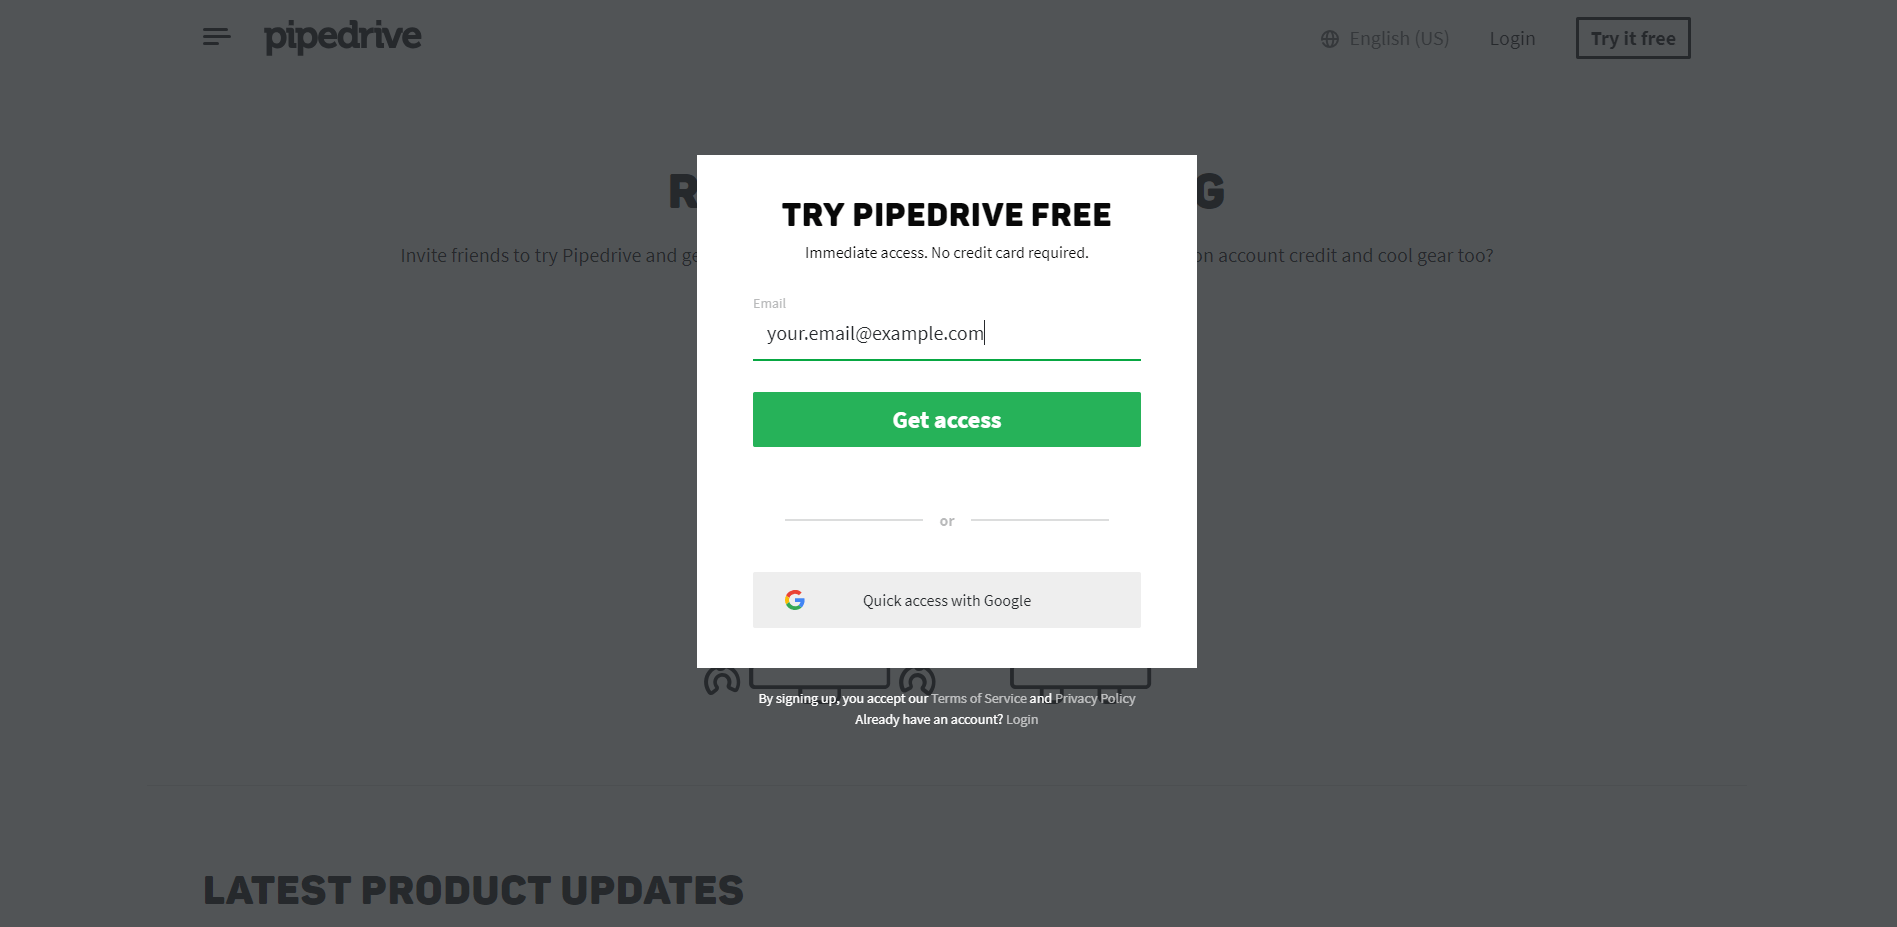 2. Enter an email address for your new Pipedrive account and click 'Get access'. The email can be changed later.